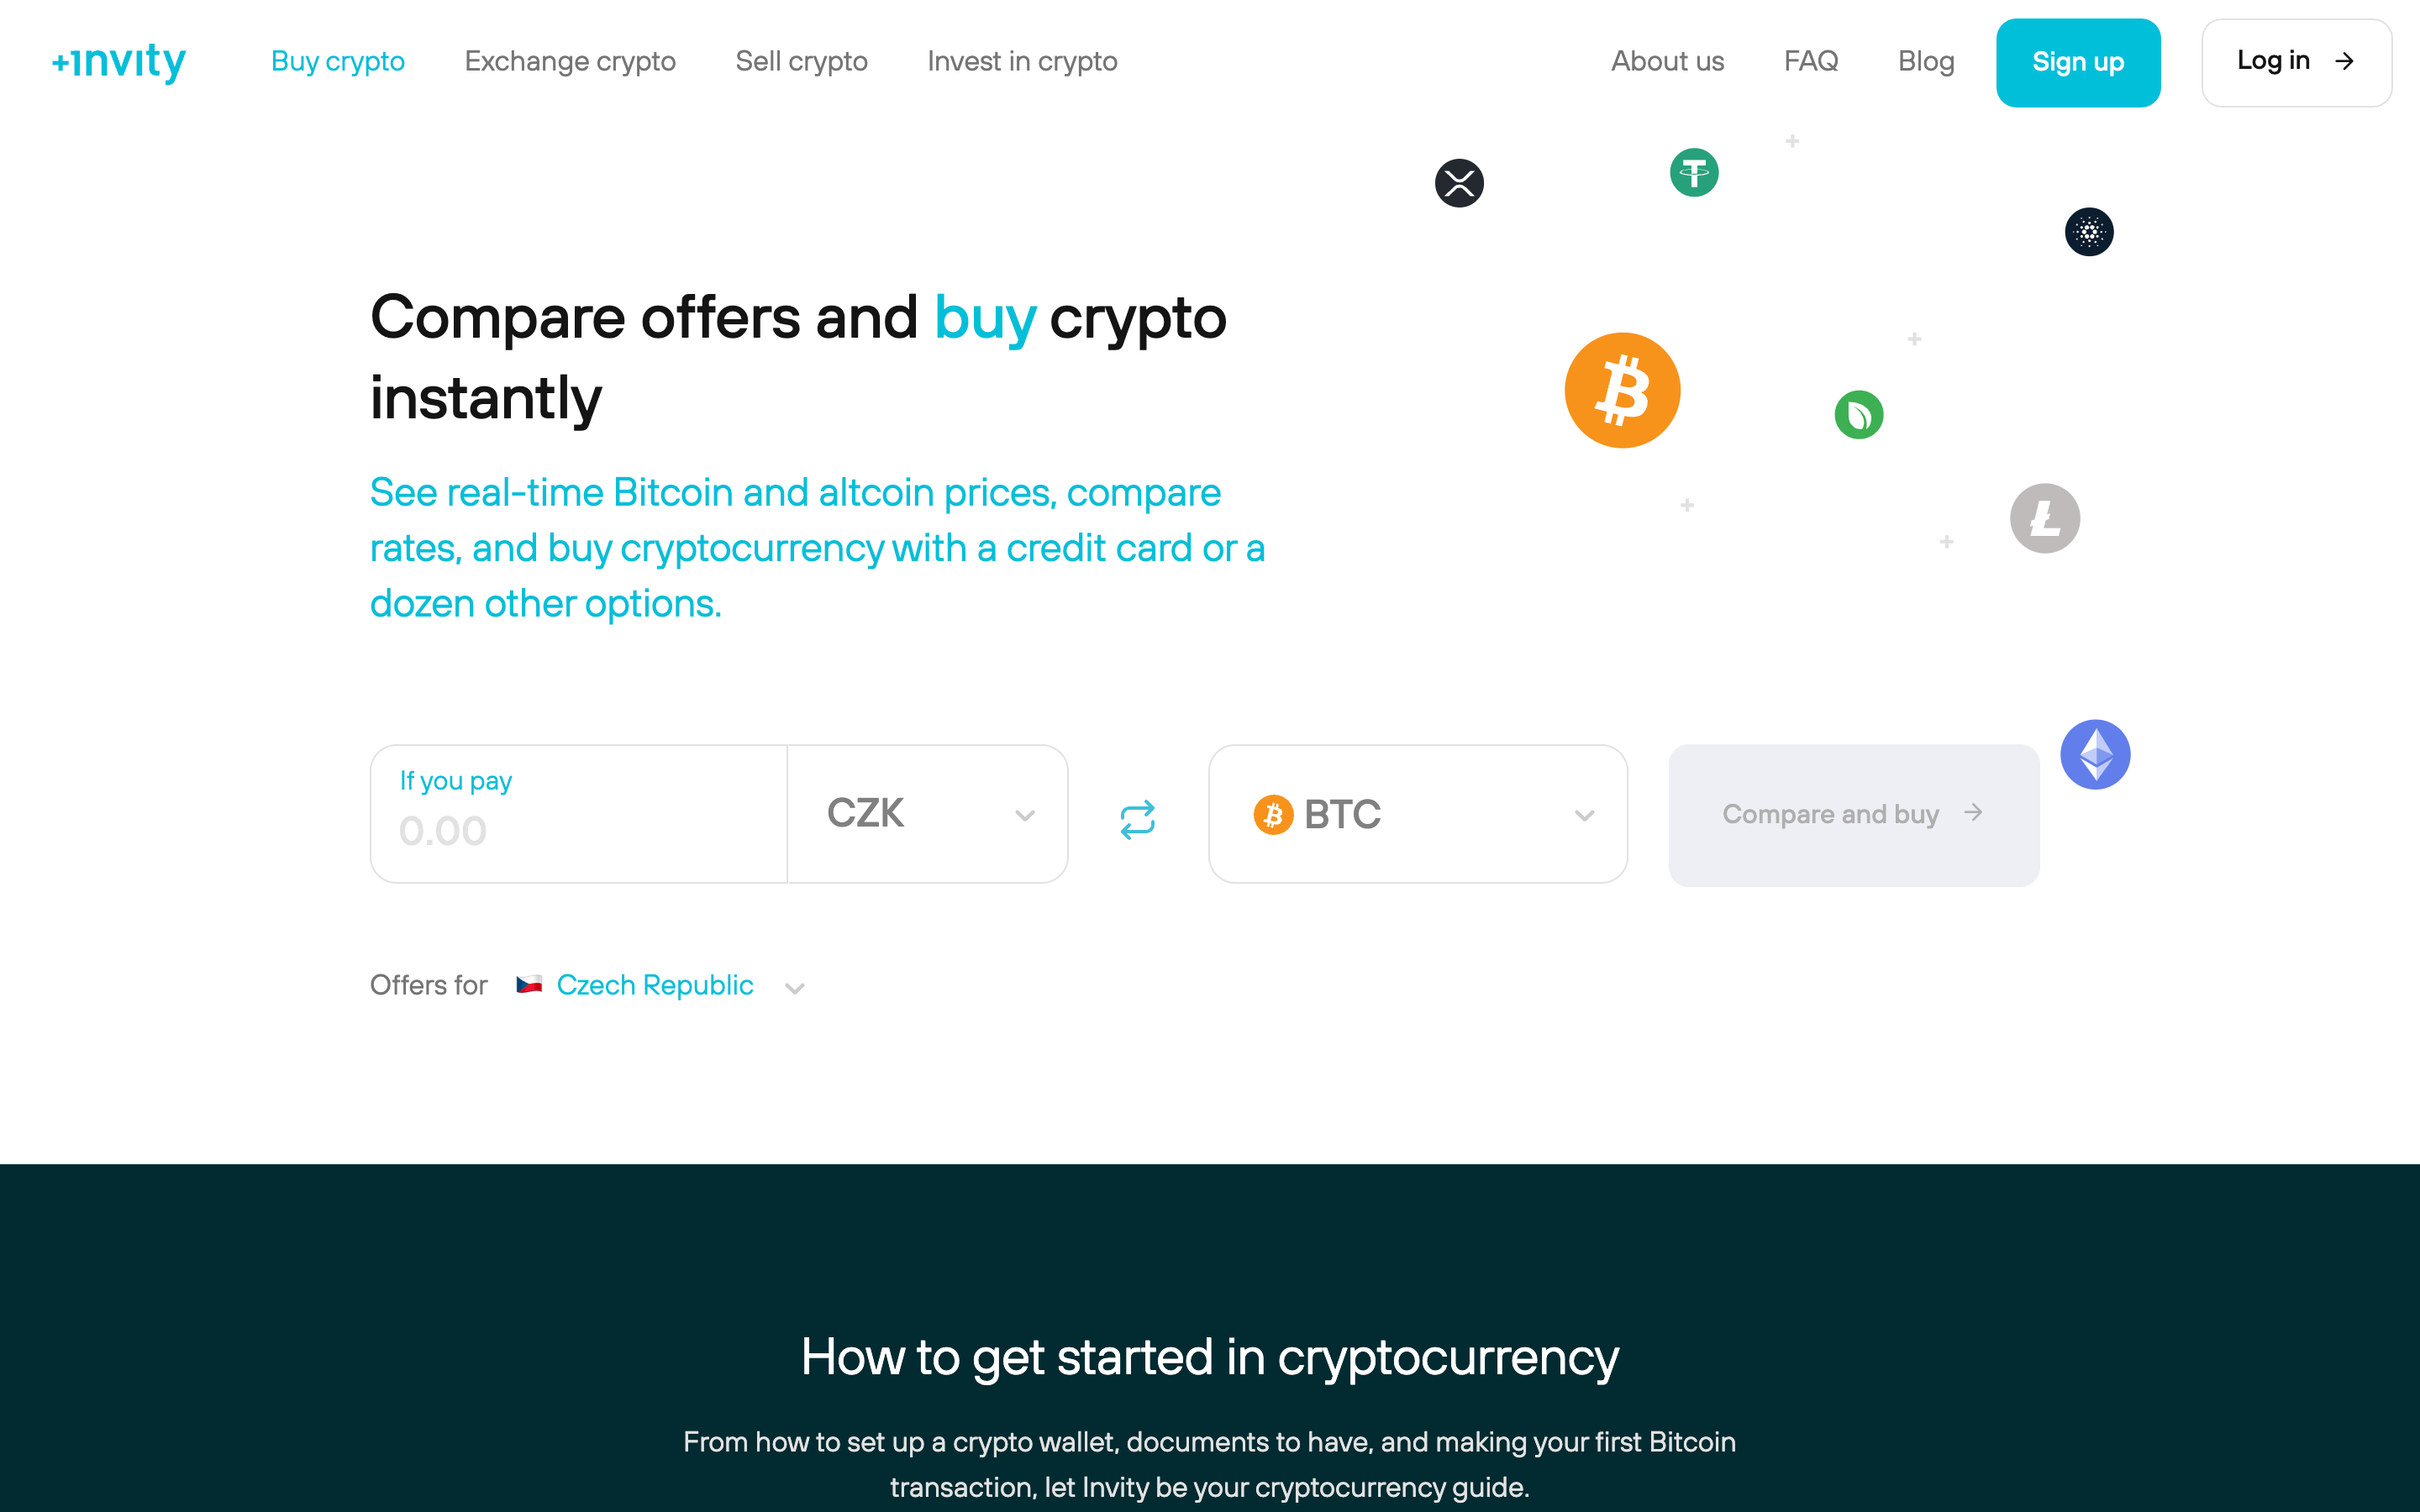 Sell Bitcoin (BTC) for Cash Instantly - ChangeHero